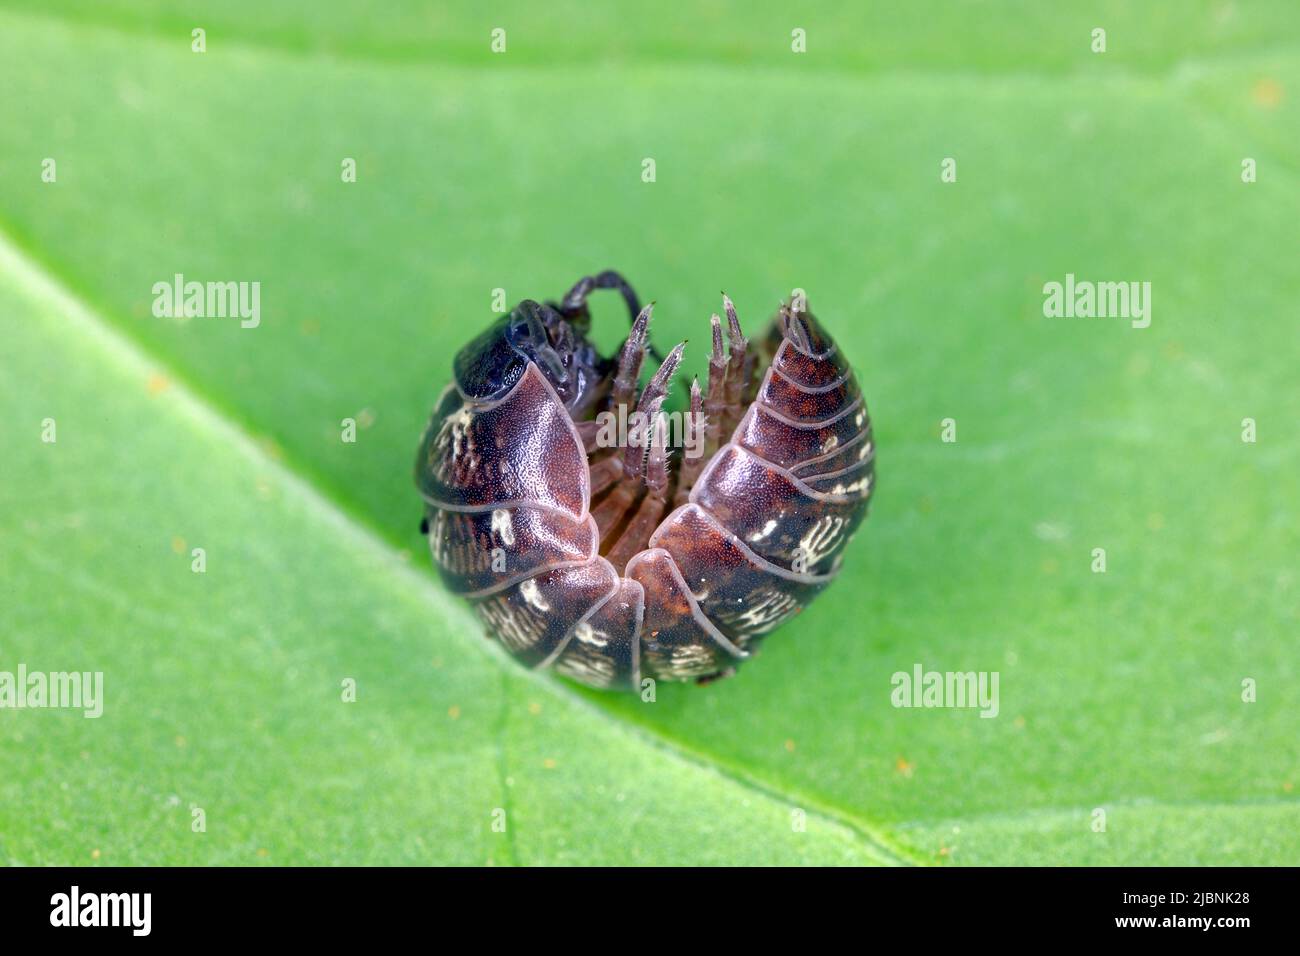 Close up of a woudlouse species, Porcellio spinicornis. Stock Photo